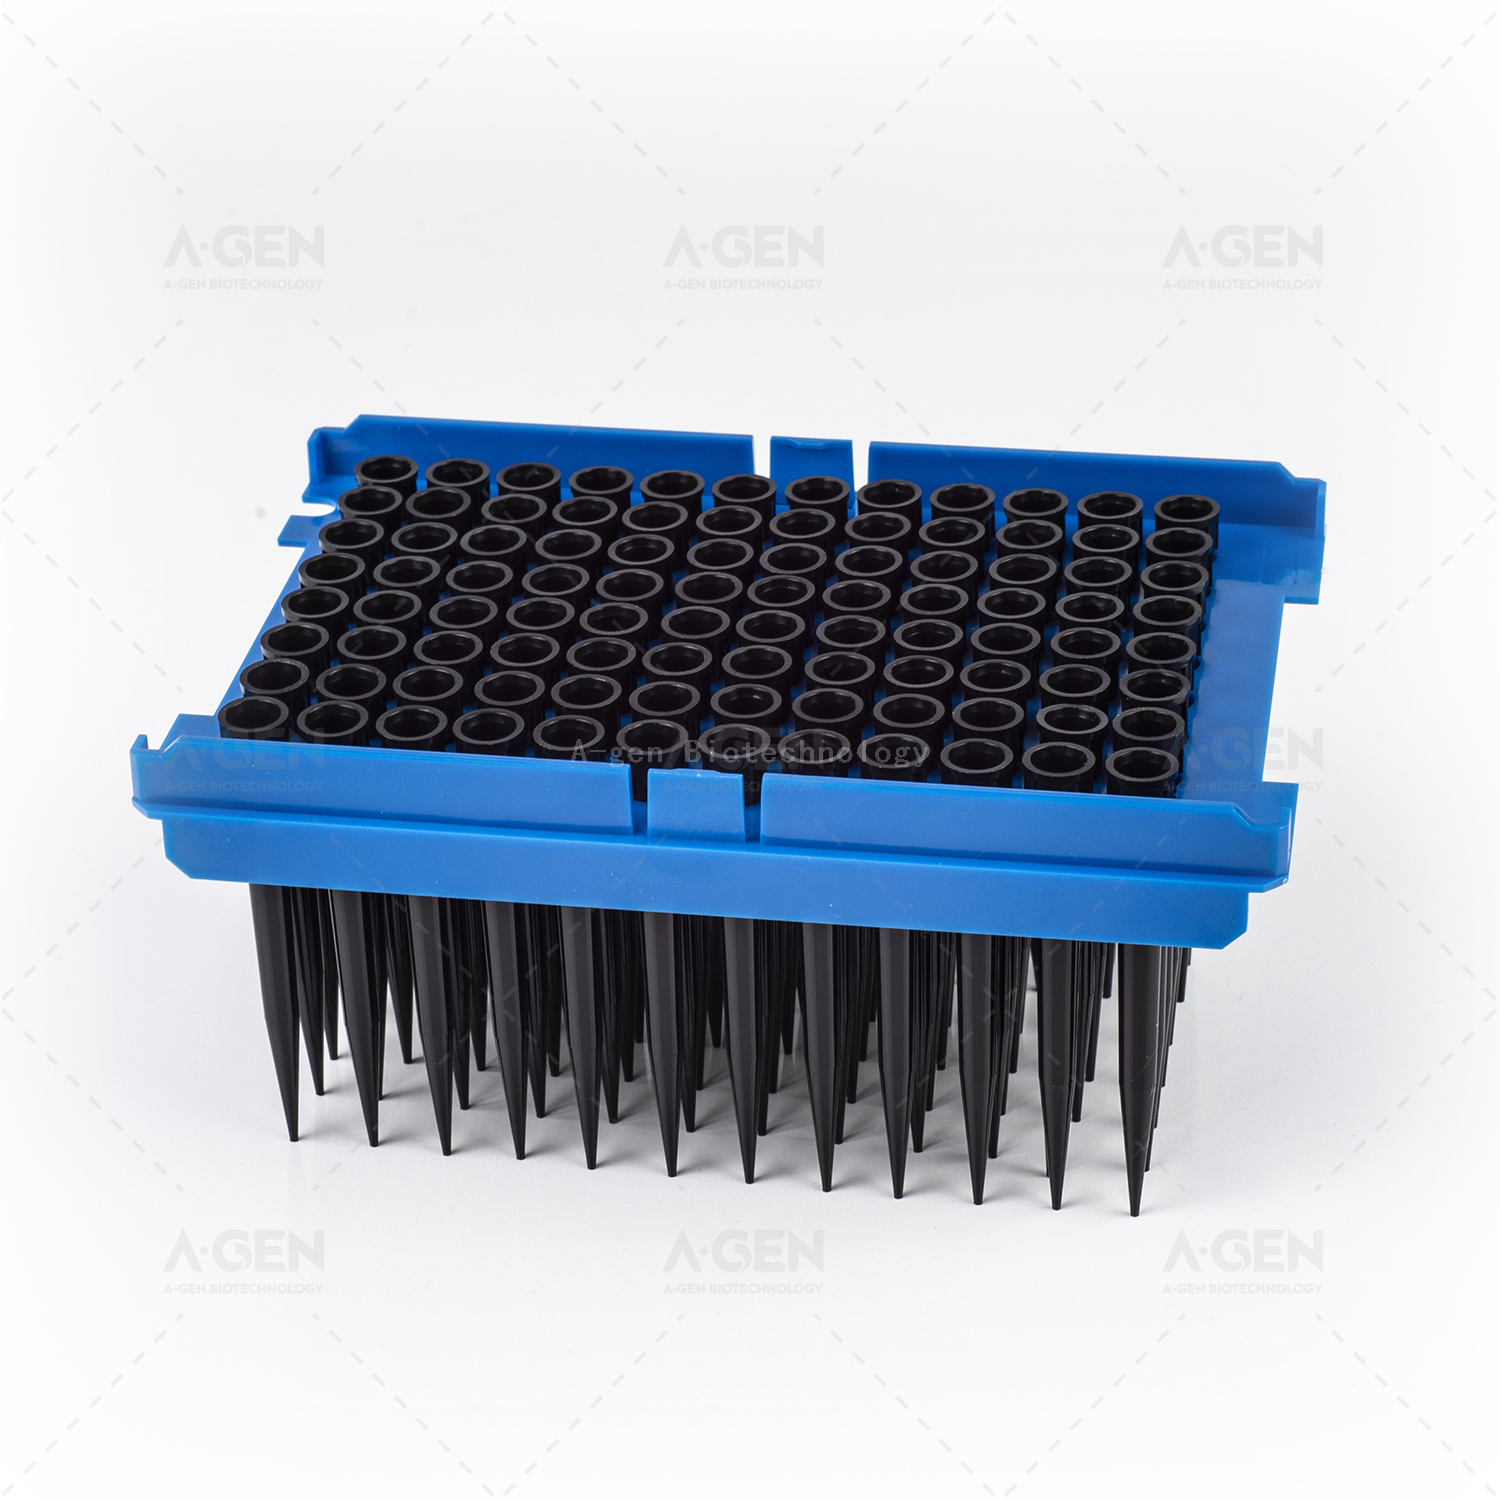 Tecan LiHa Conductive 200μL PP Pipette Tip (Racked,sterilized) for Liquid Transfer With Filter TTF-200C-RSL DNAse/RNAse Free Low Retention